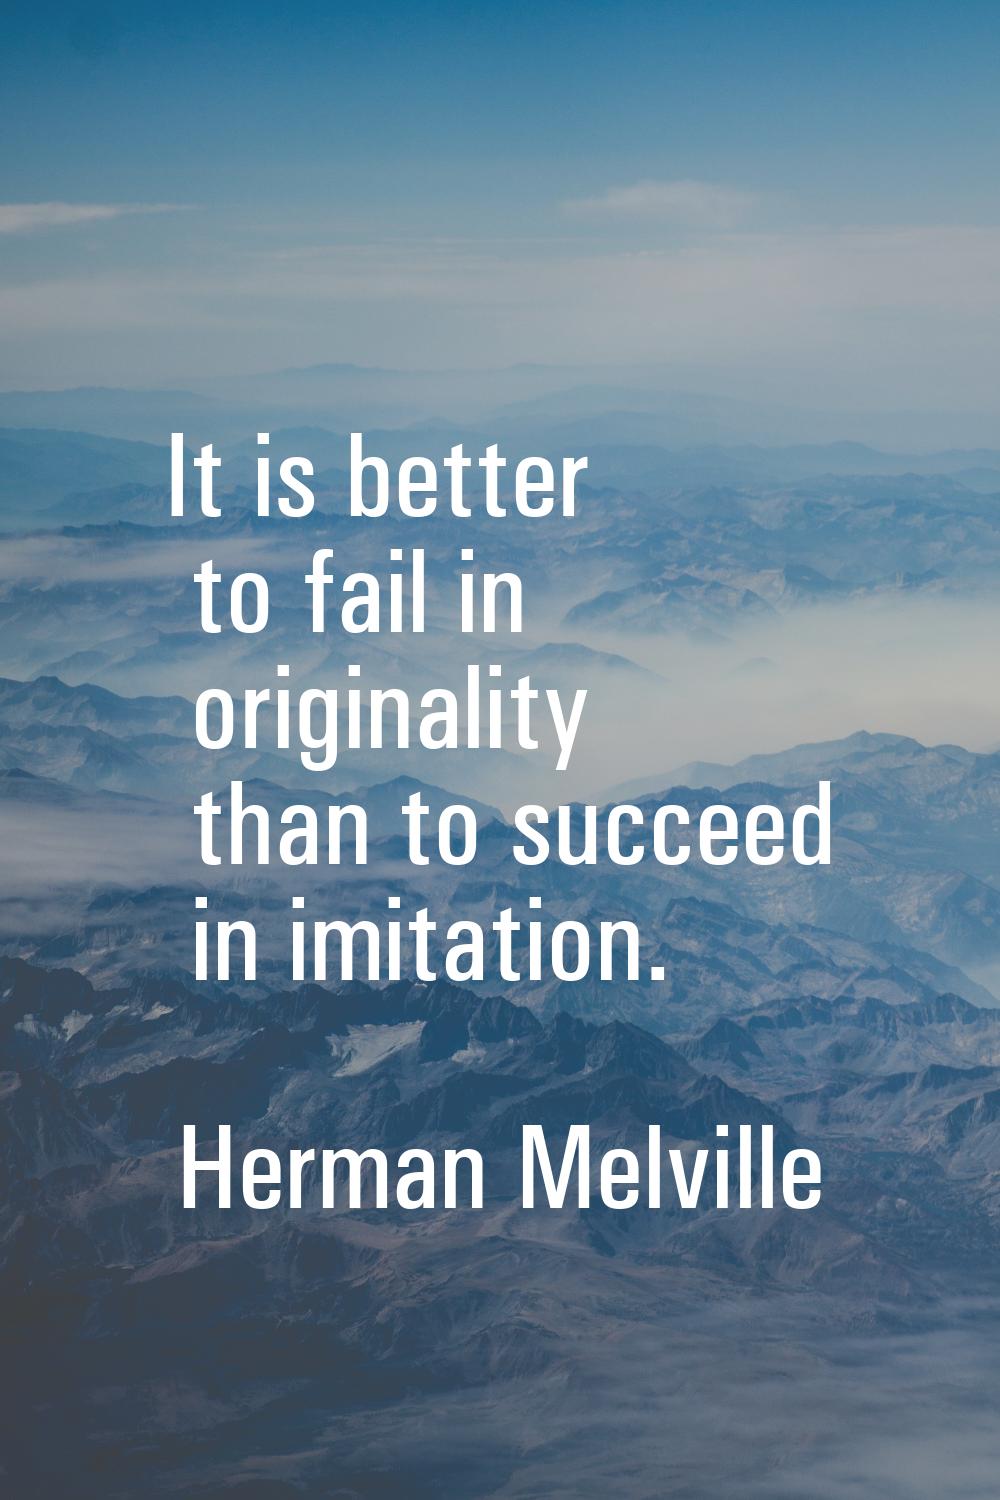 It is better to fail in originality than to succeed in imitation.